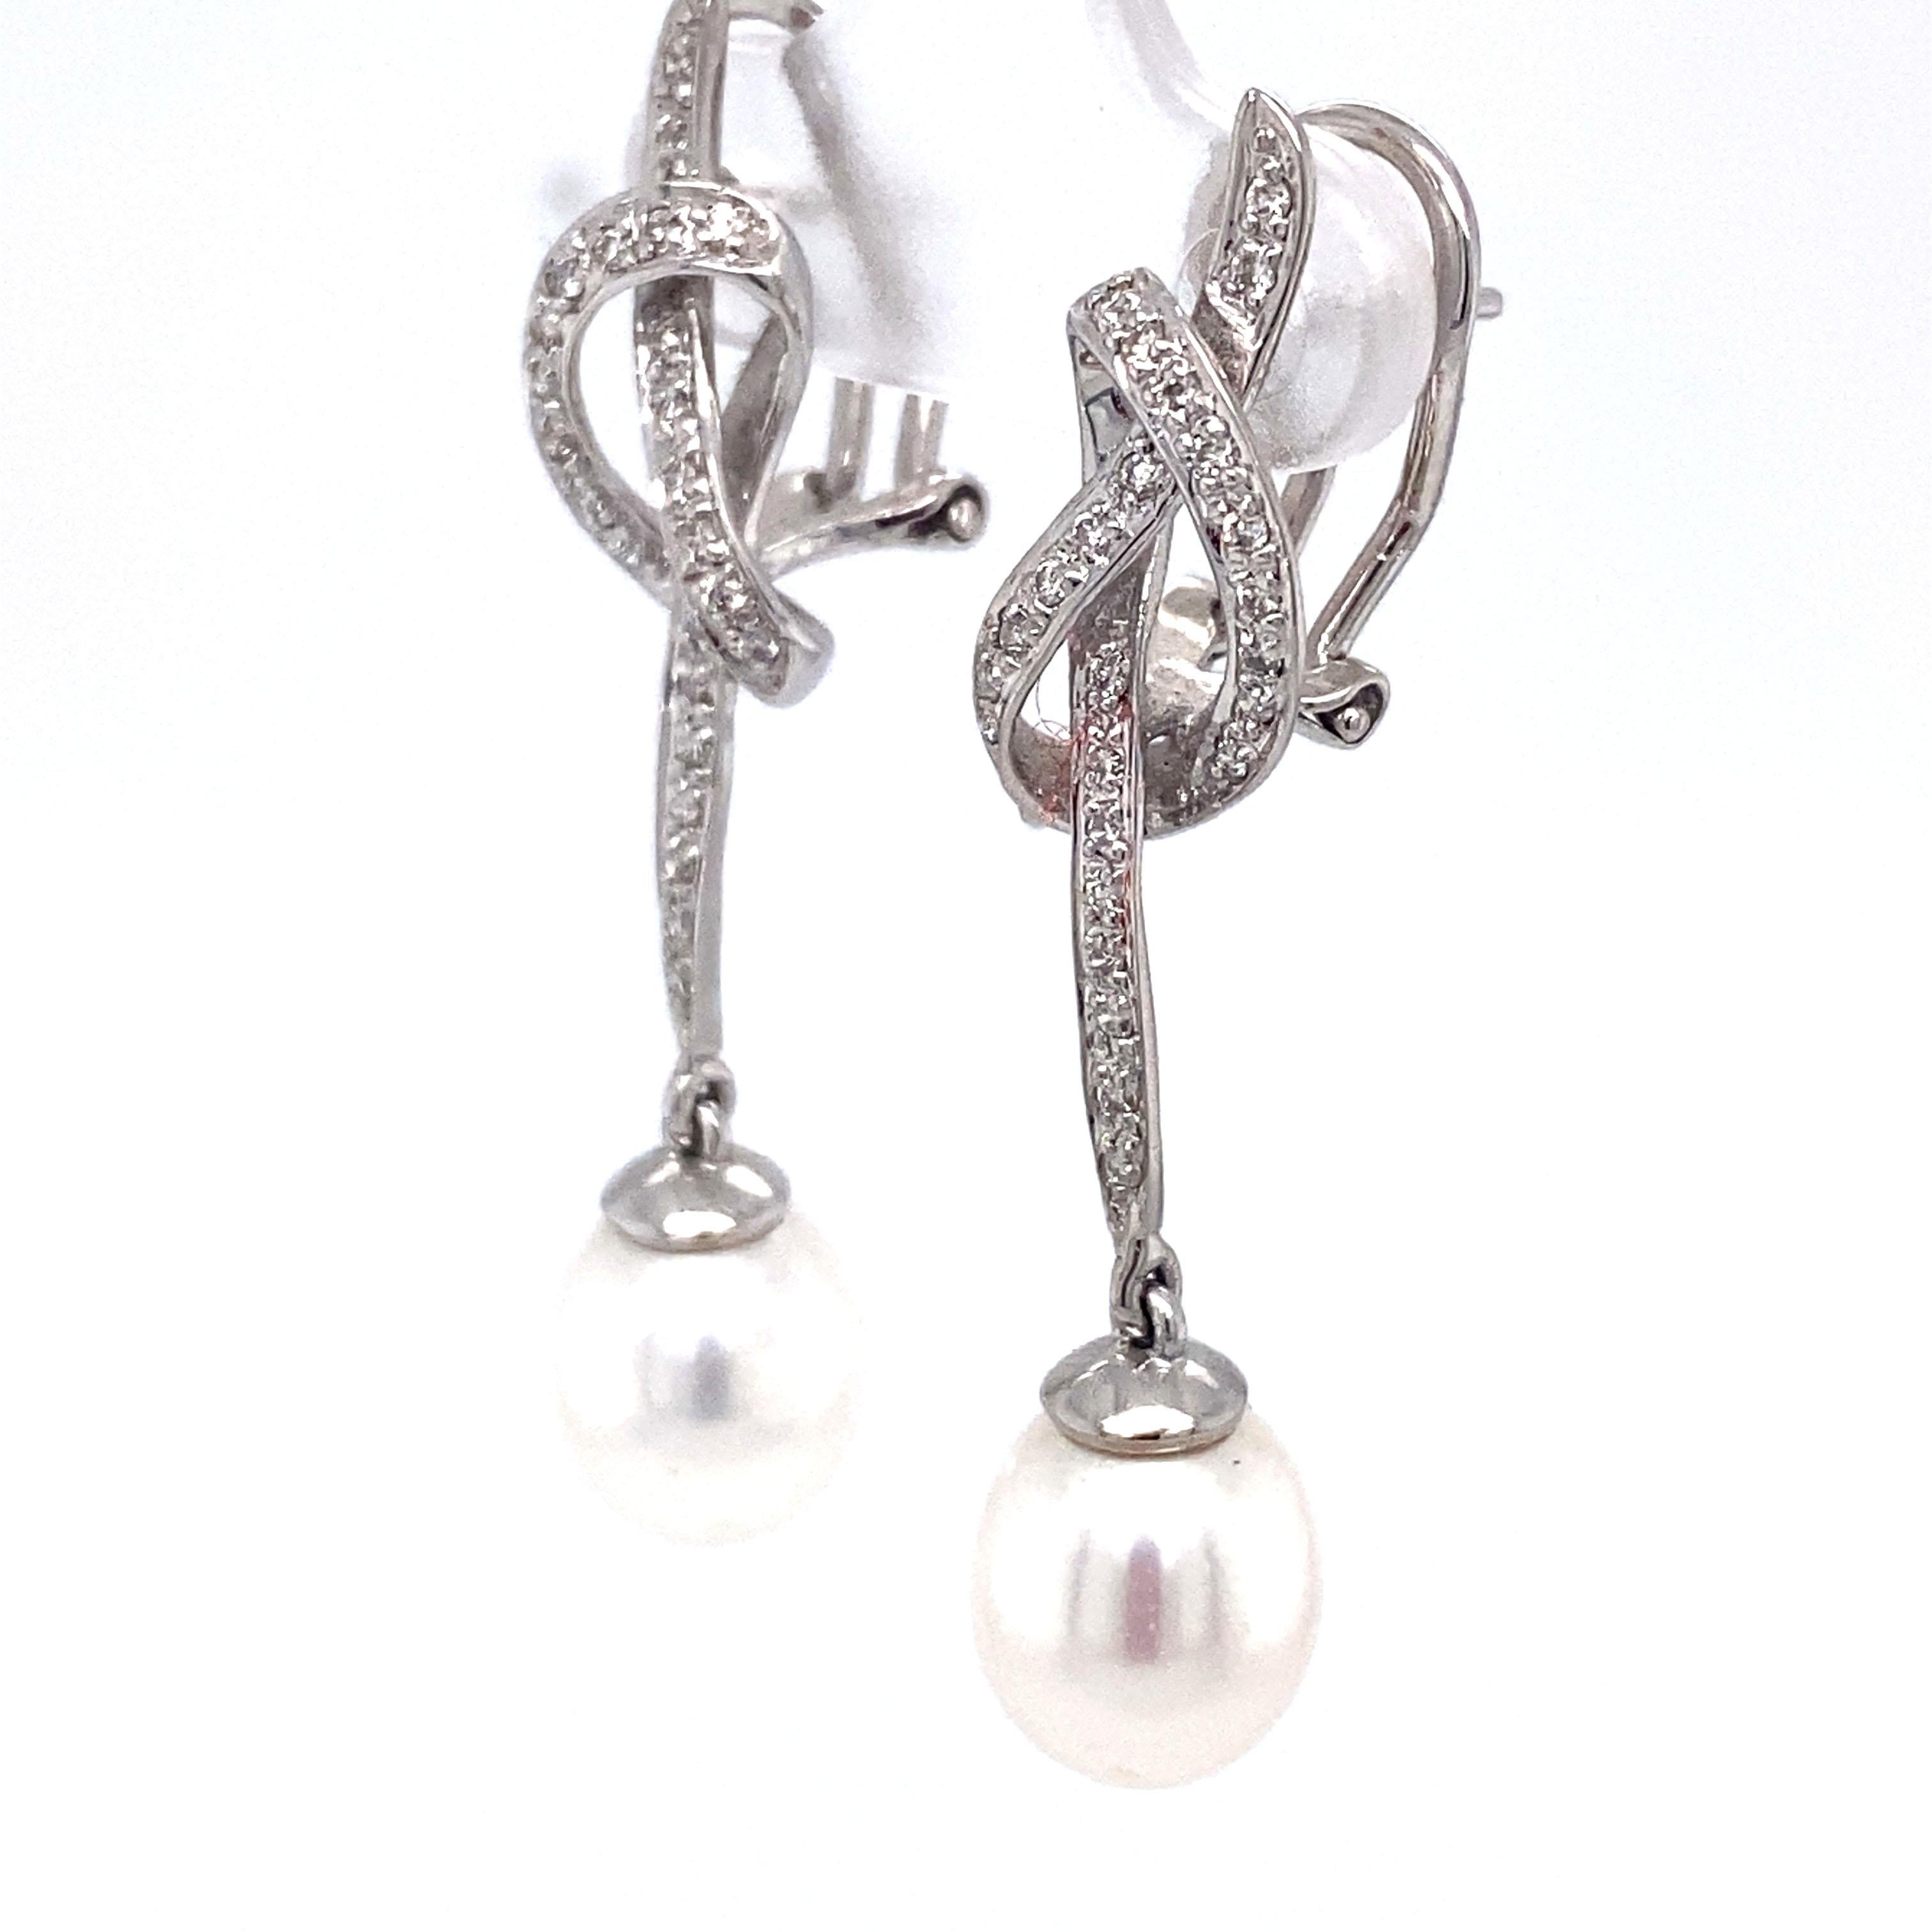 Women's Circa 1980s 0.75 Carat Diamond and Pearl Knot Dangle Earrings in 18K White Gold